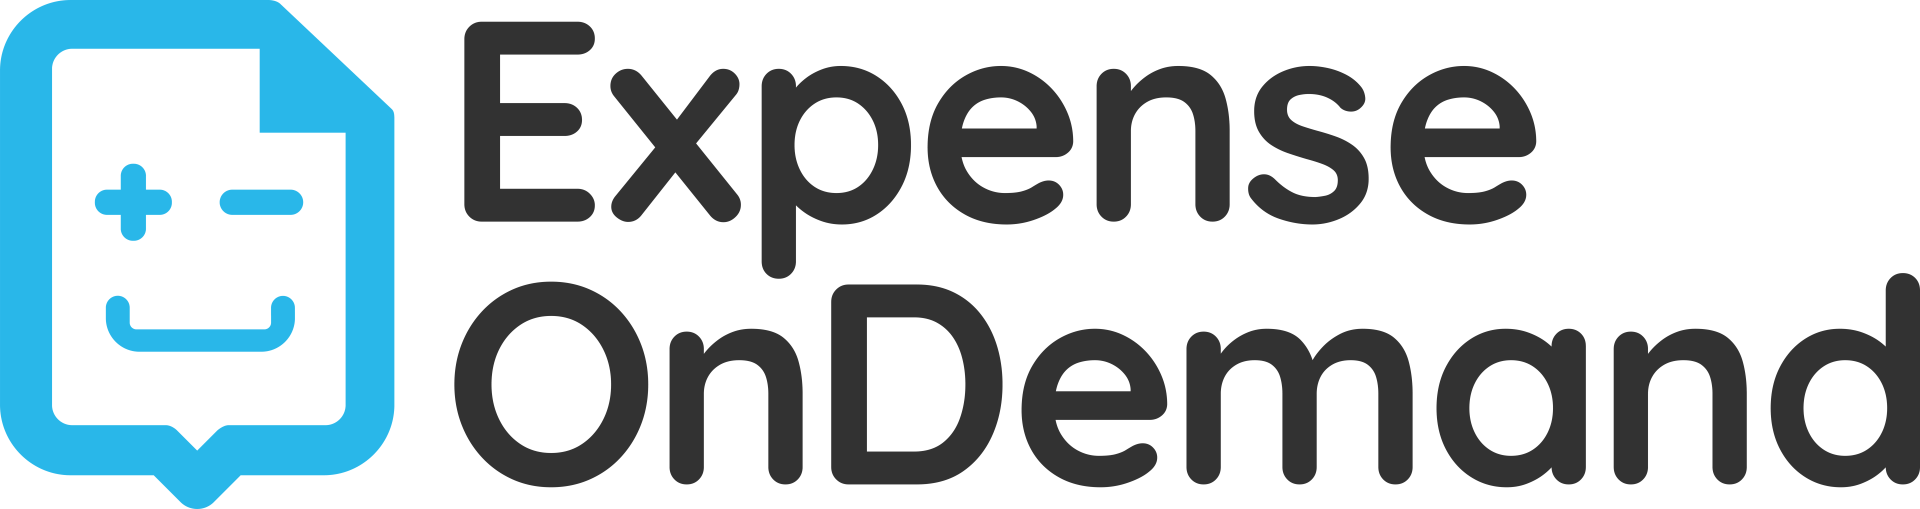 Per Diem Meaning from ExpenseOnDemand image